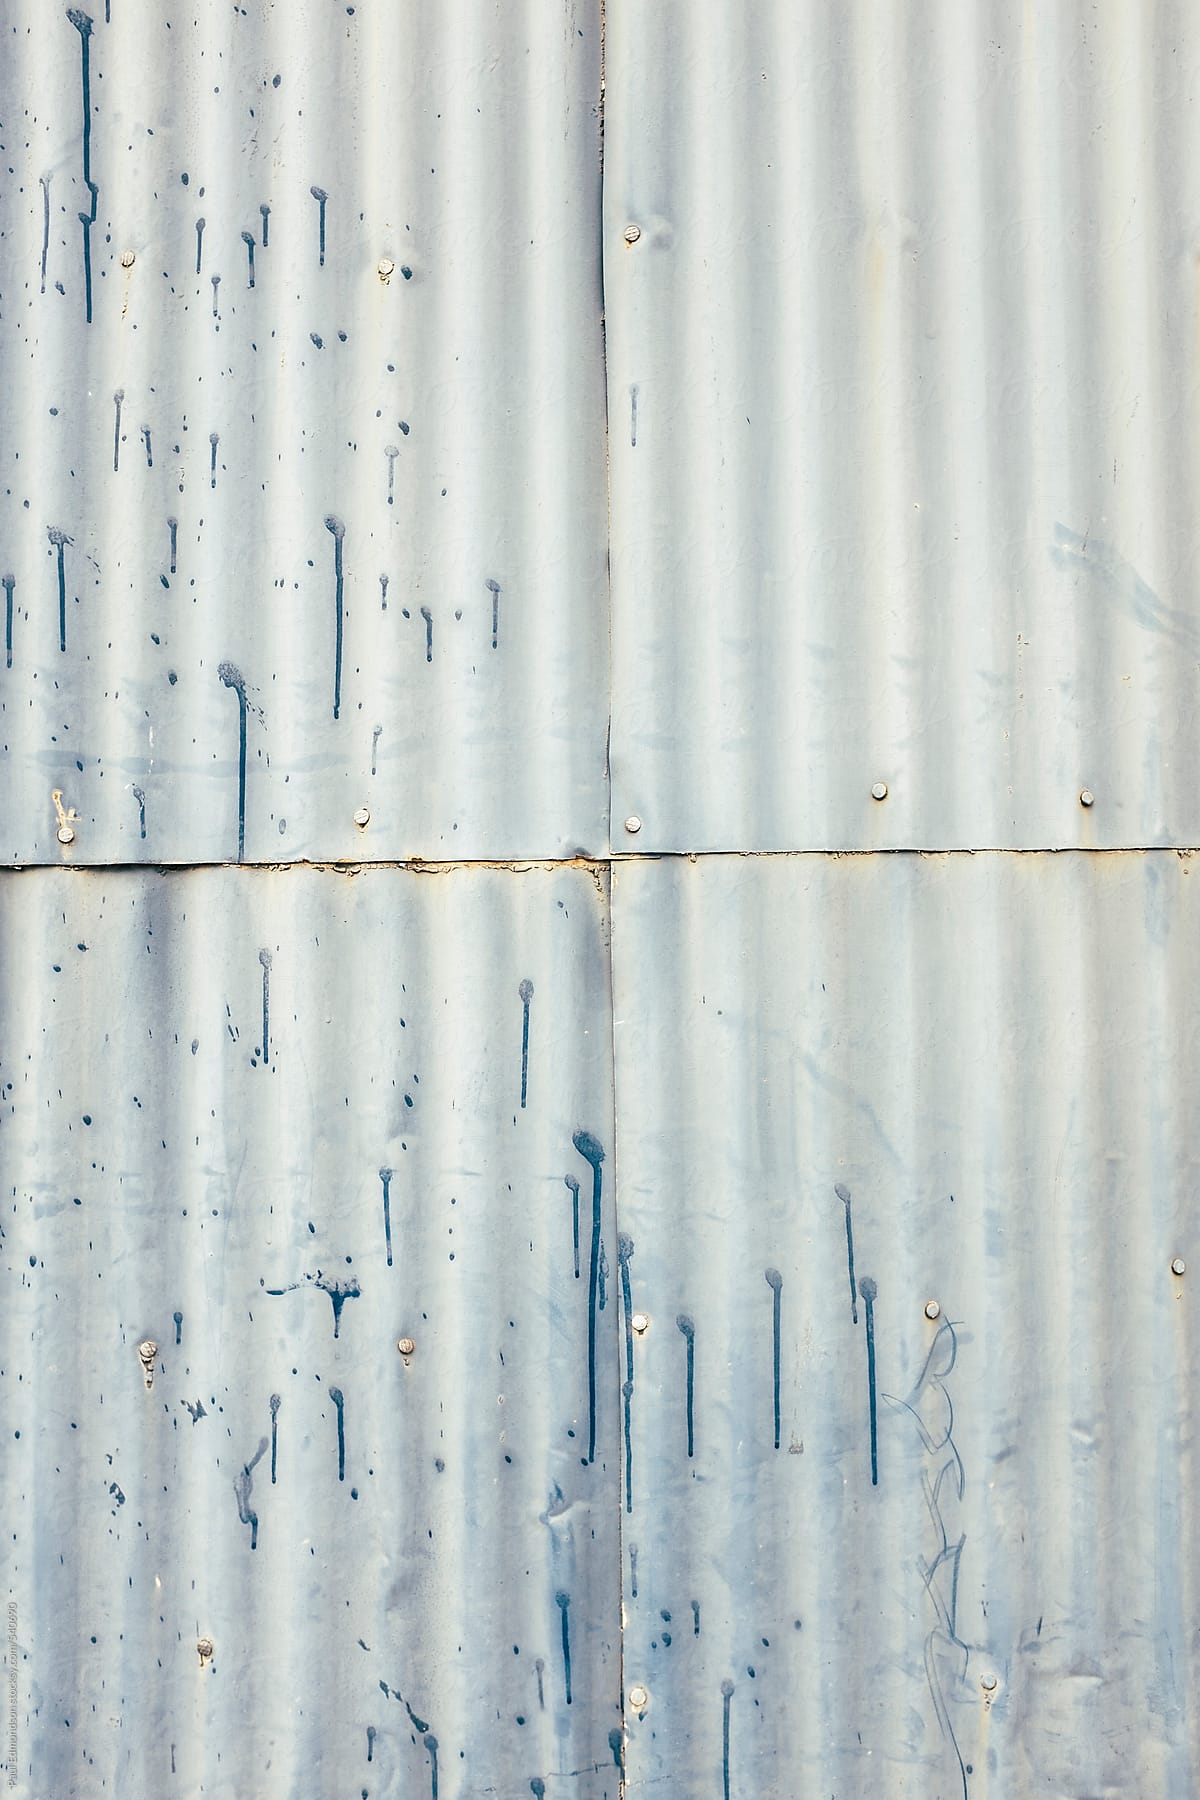 Detail of old metal, corrugated siding on warehouse exterior